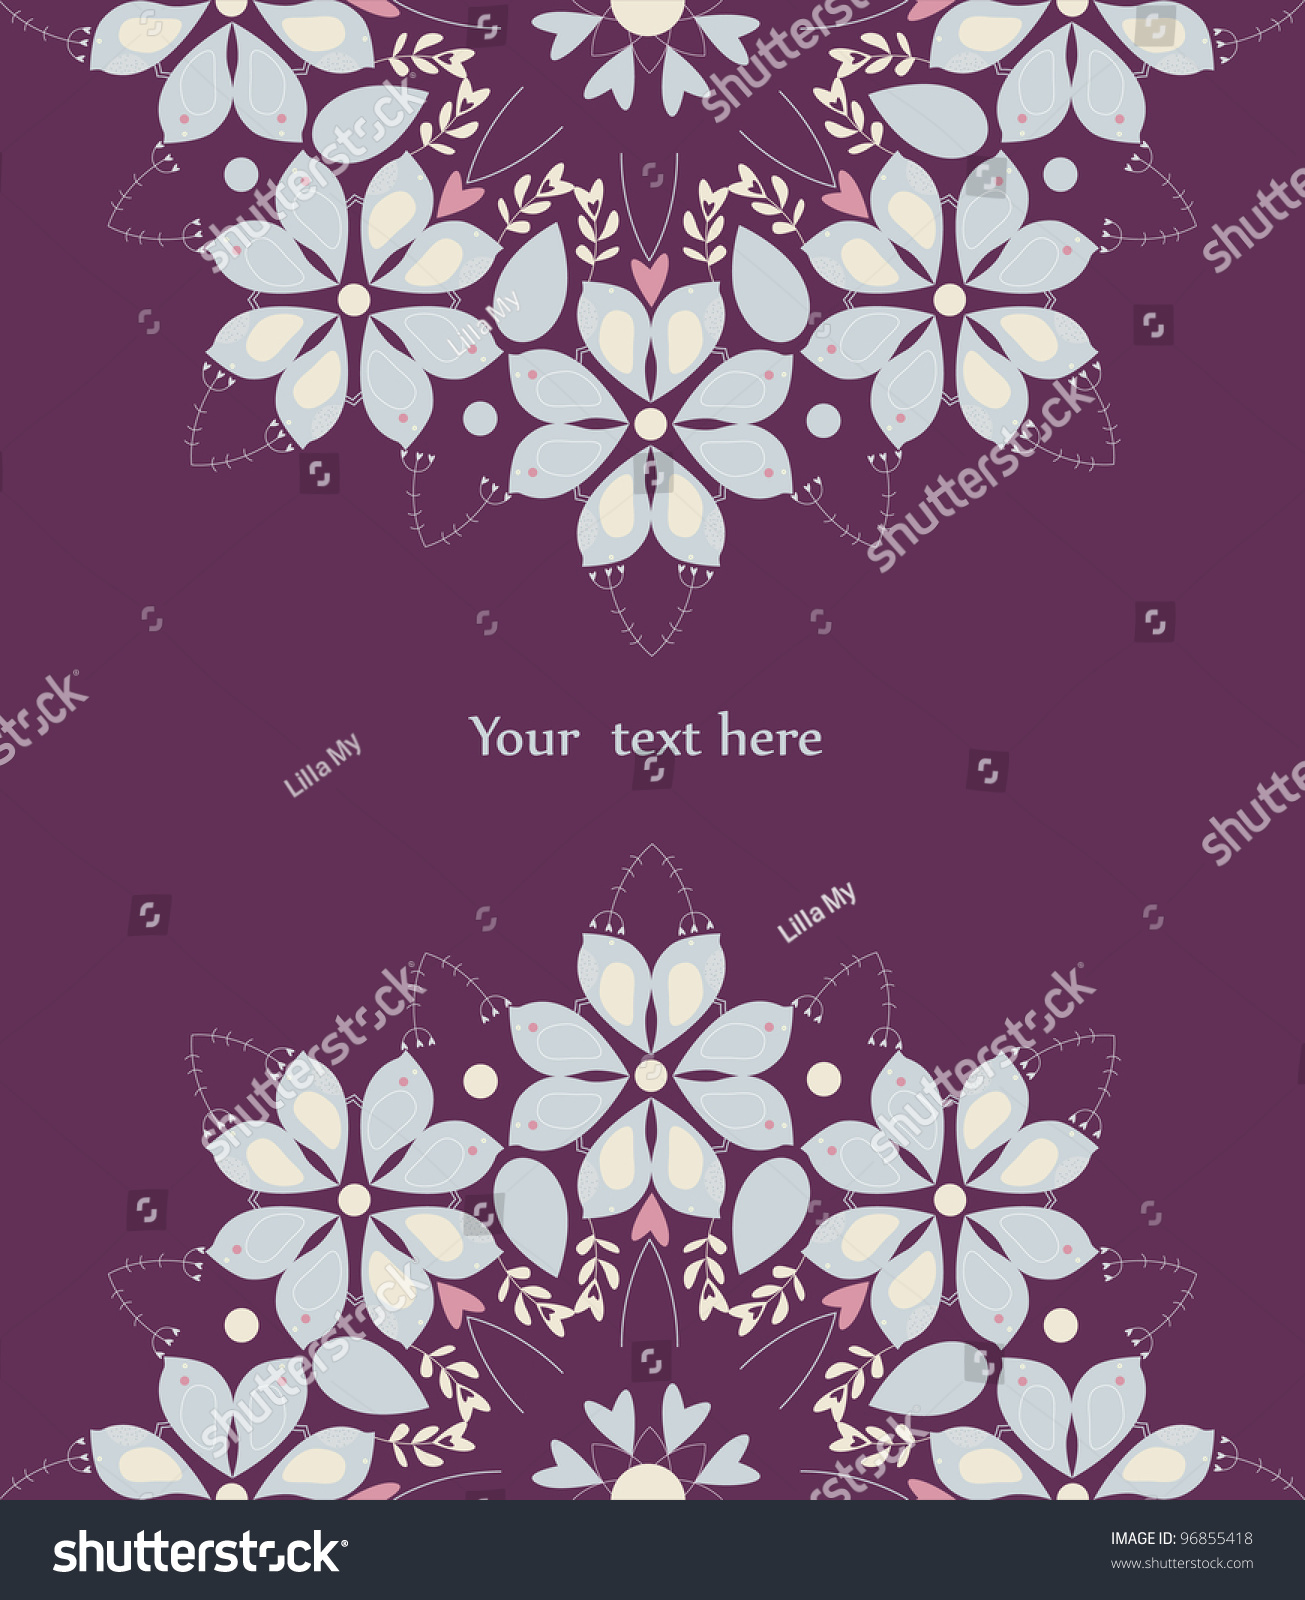 Lacy Card From Flower Stock Vector Illustration 96855418 : Shutterstock